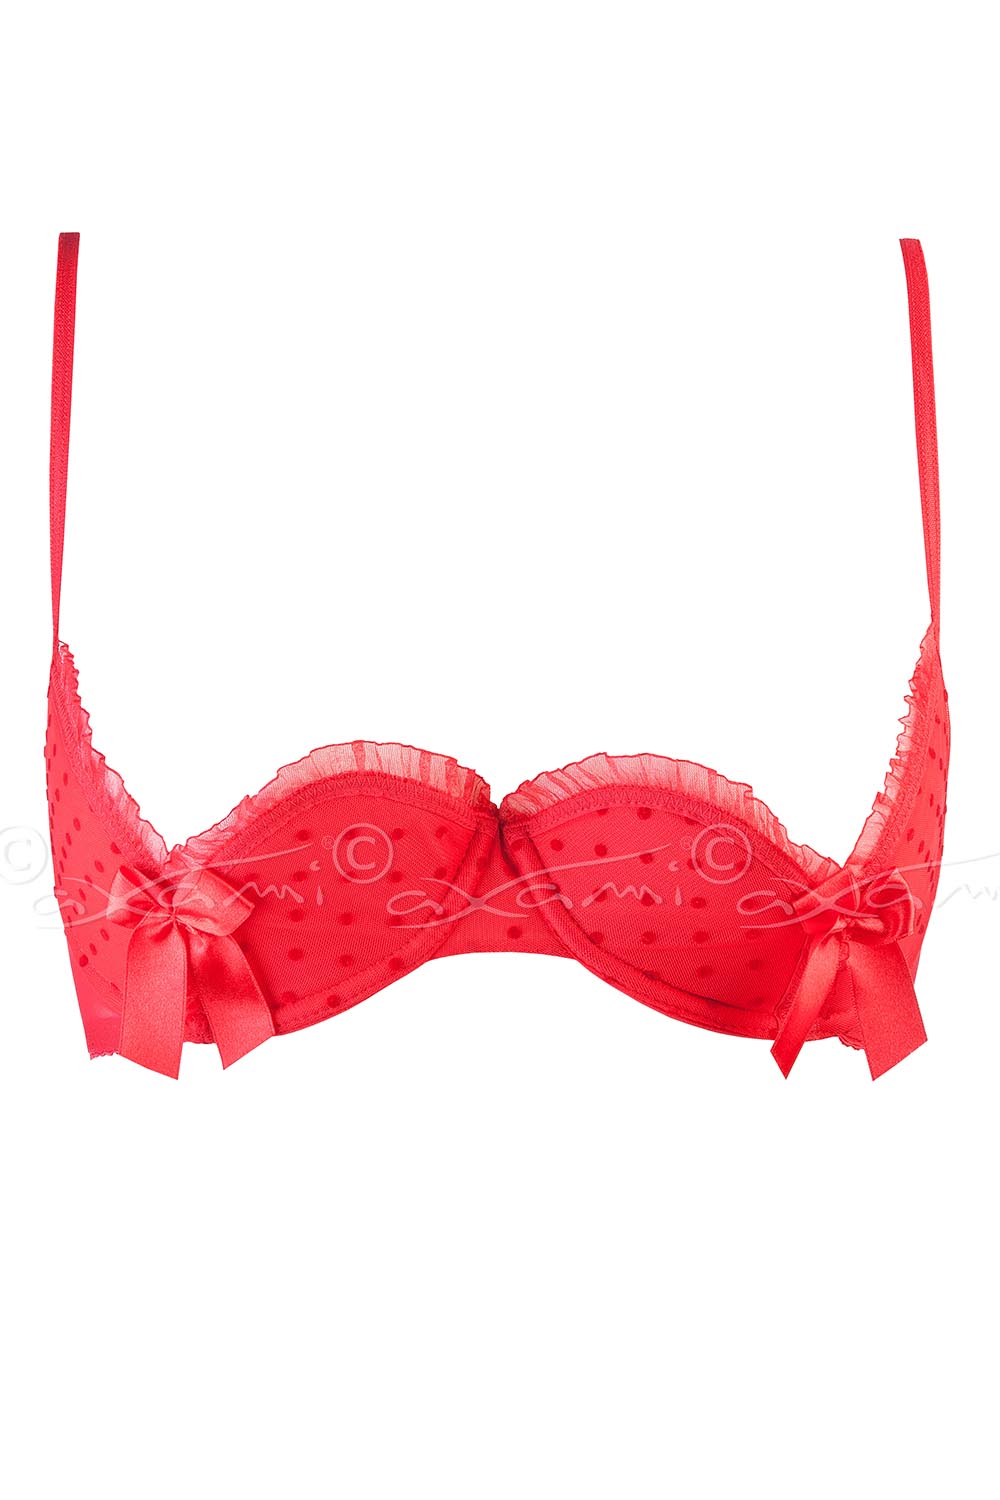 Axami V-5231 Notice me tempting luxurious sexy open cup shelf bra - made  in EU (available matching thong V-5238 and garter belt V-5232), Red